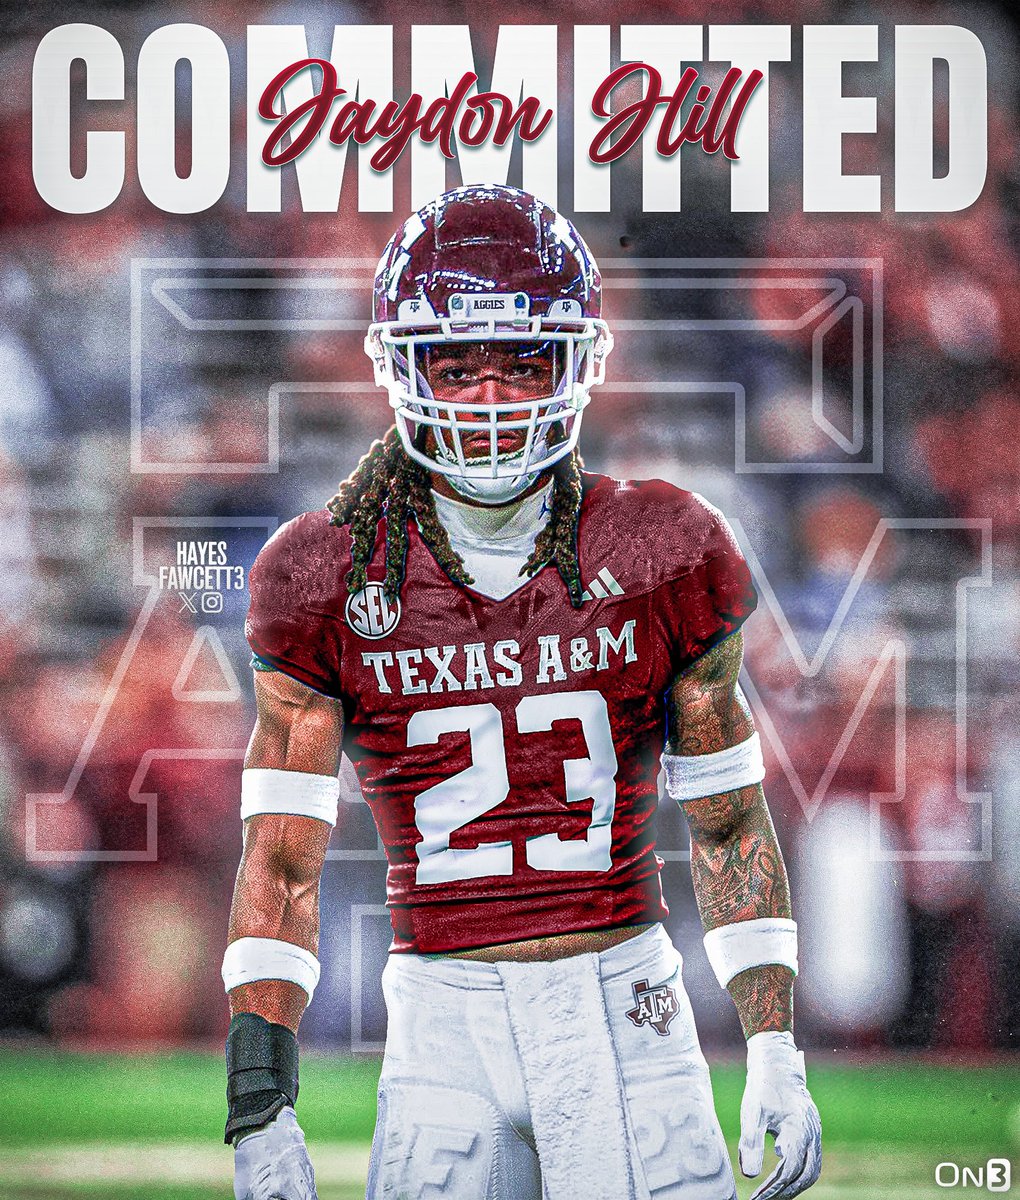 BREAKING: Former Florida CB Jaydon Hill has Committed to Texas A&M, he tells @on3sports The 6’0 195 CB totaled 88 tackles, 15 Passes Defended, 2.5 Sacks, & 2 INTs in his time at Florida Will have 1 year of eligibility remaining #GigEm 👍🏼 on3.com/news/jaydon-hi…